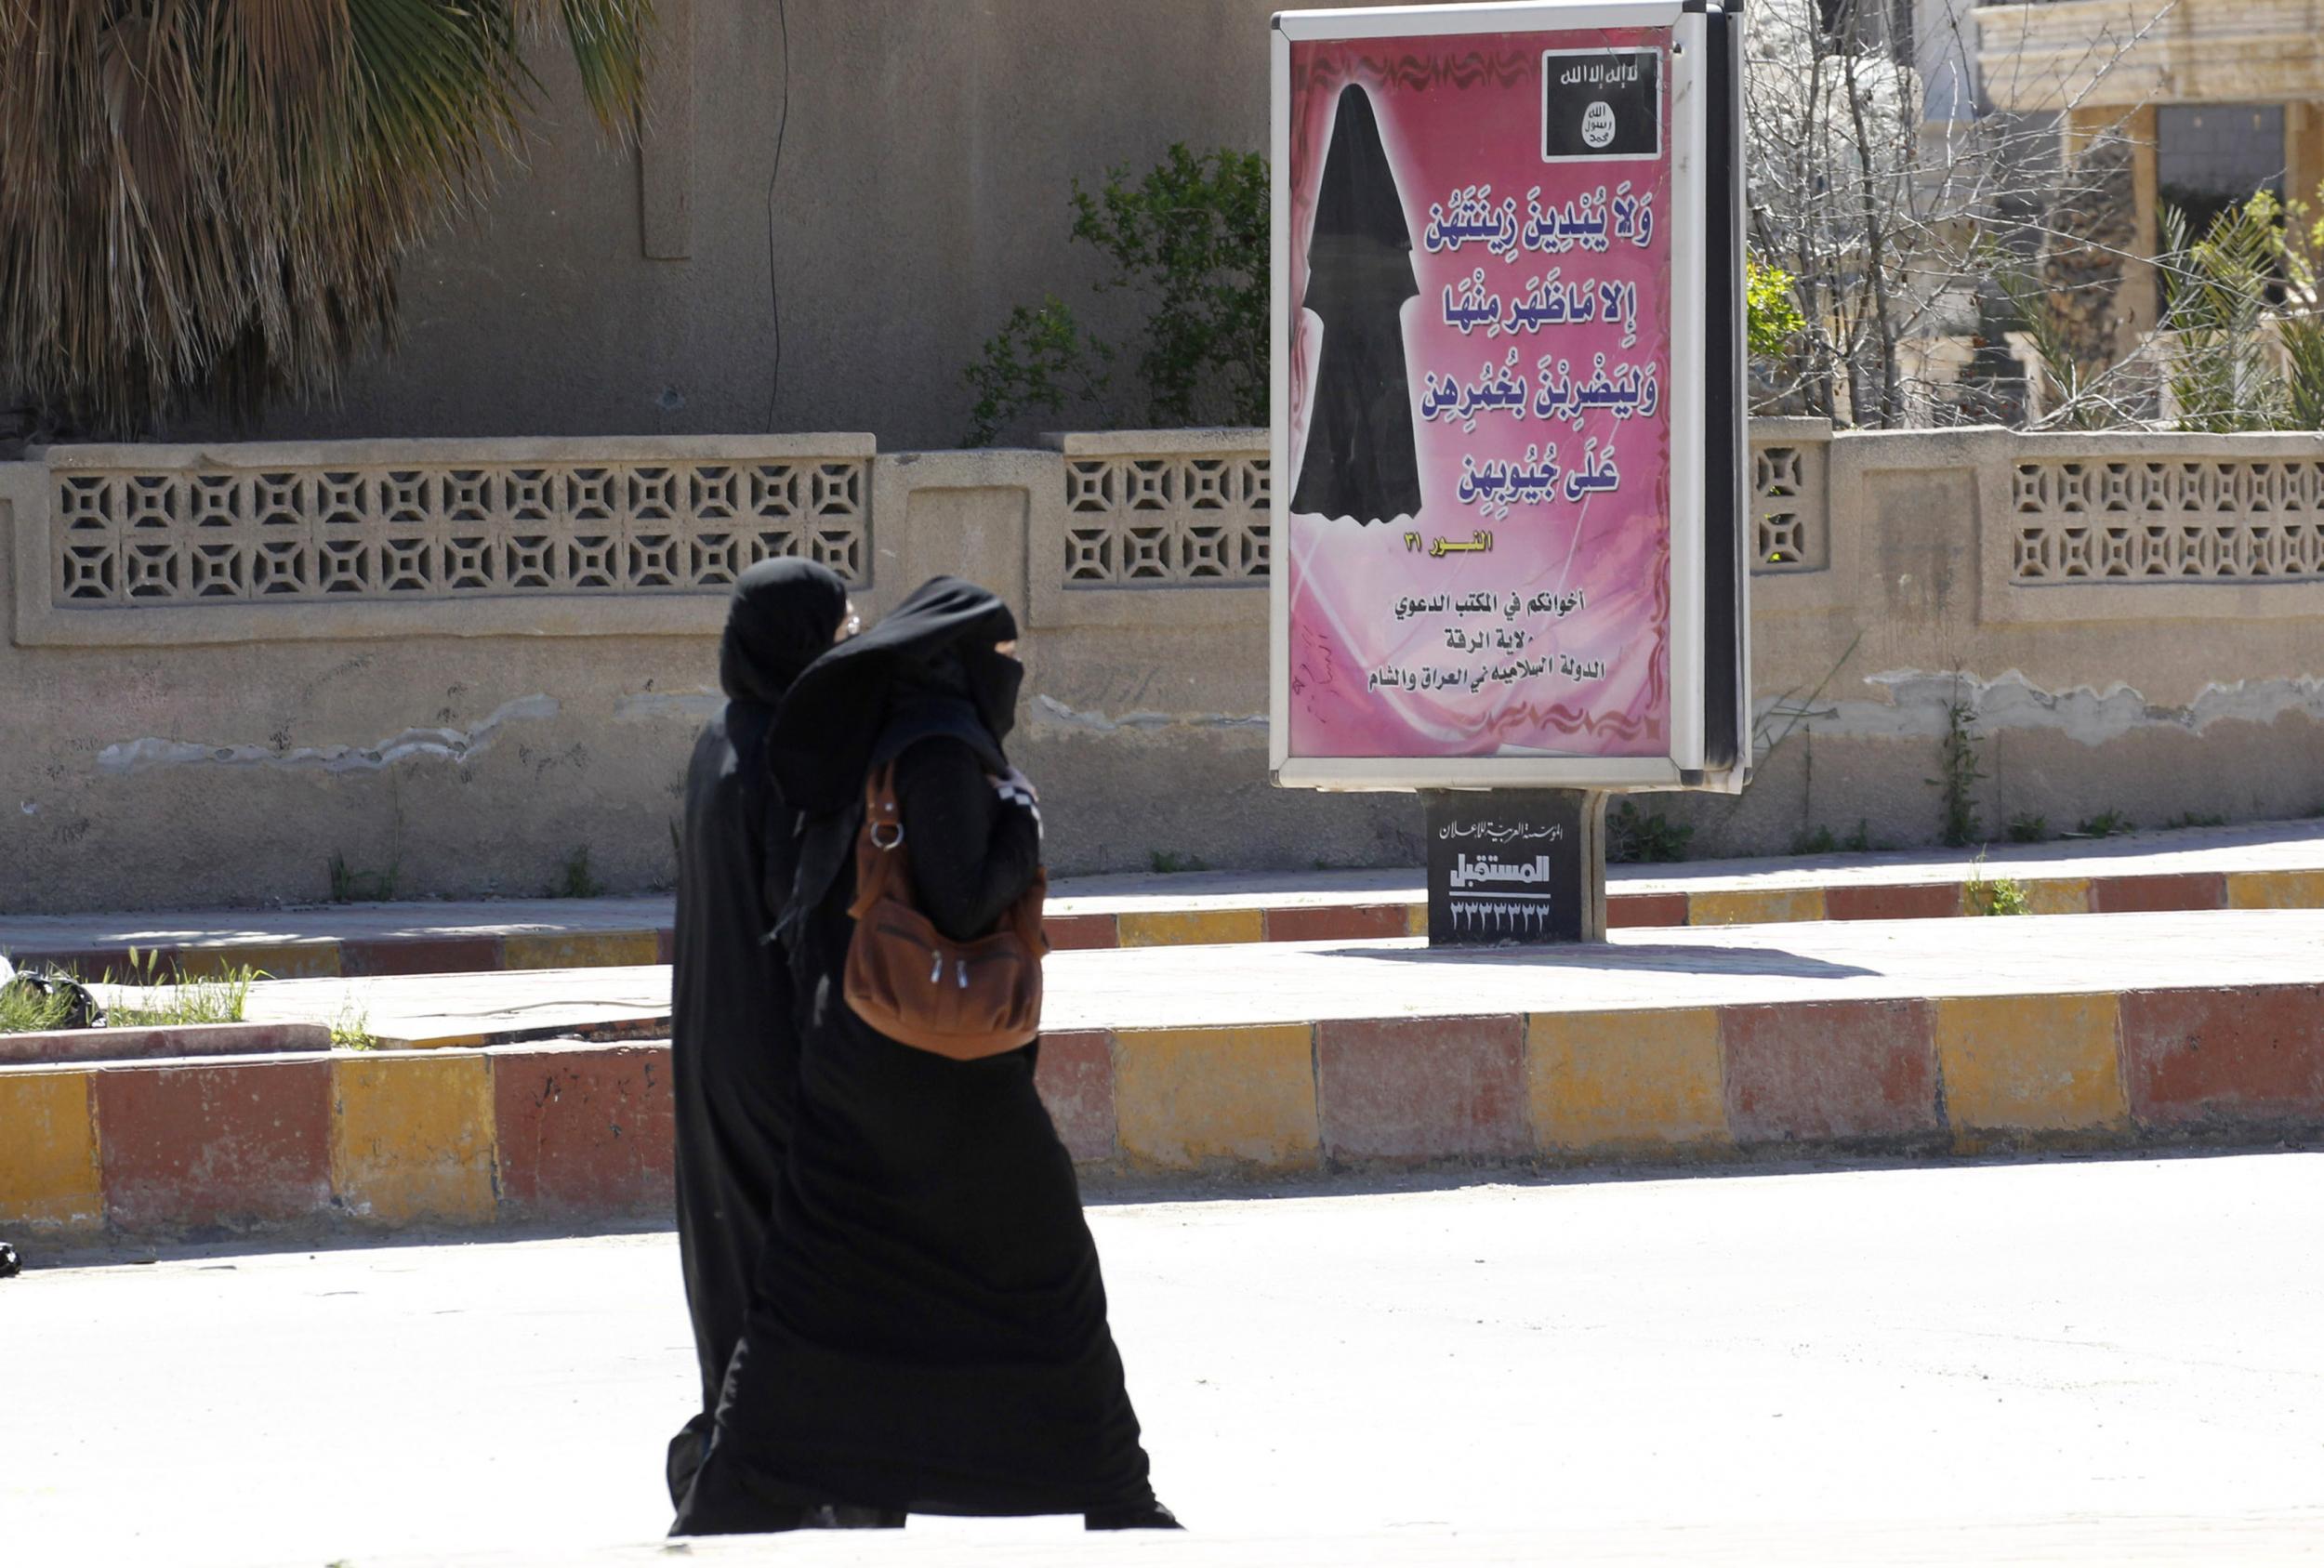 Veiled women walk past a billboard that carries a verse from the Qu'ran urging women to wear a hijab in the then Isis-controlled province of Raqqa on 31 March 2014